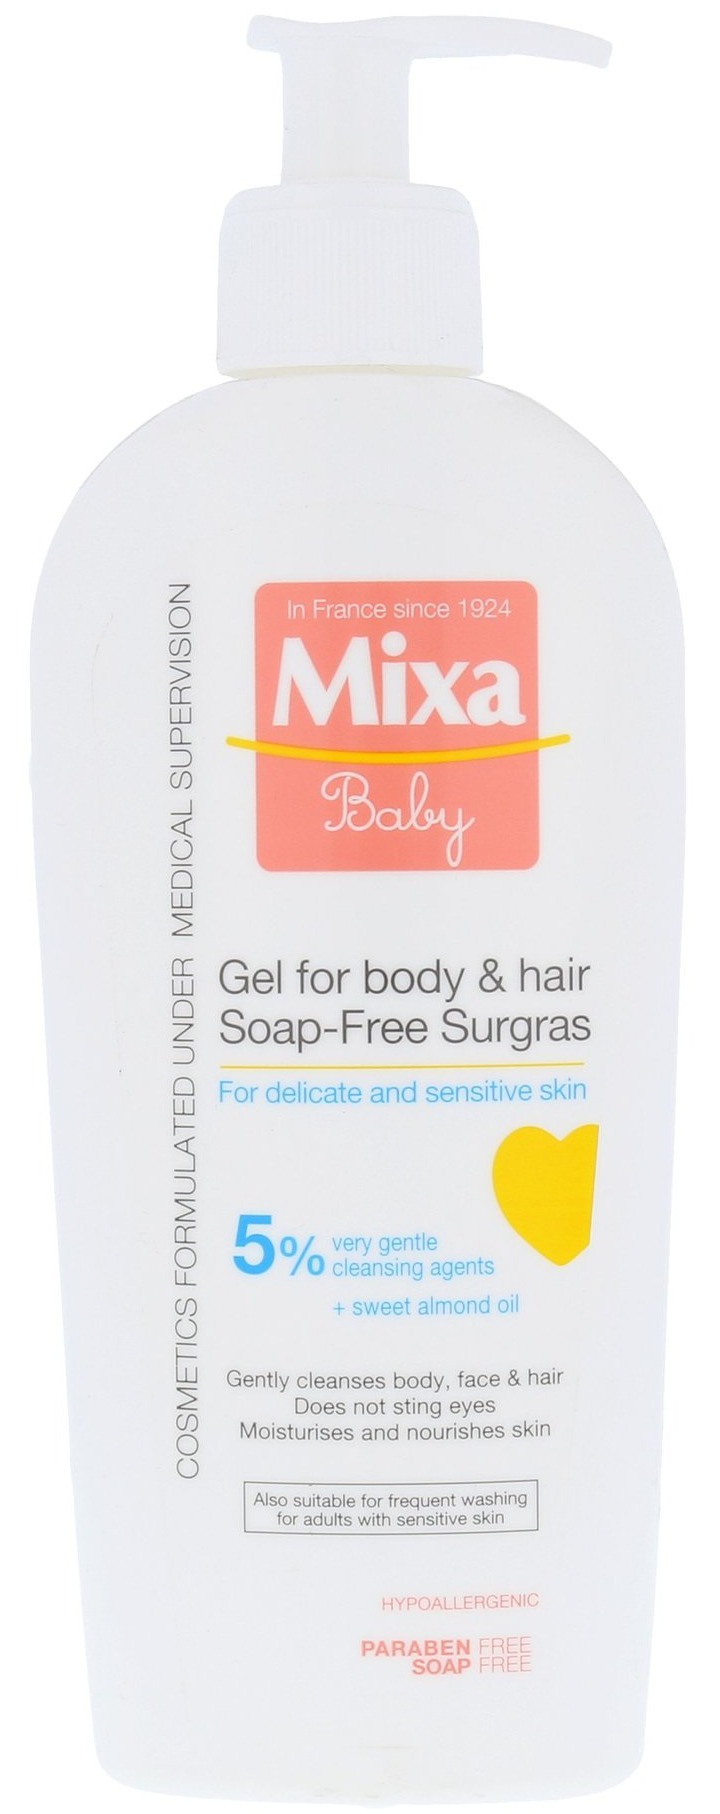 Mixa Baby Gel For Body & Hair Soap-Free Surgras